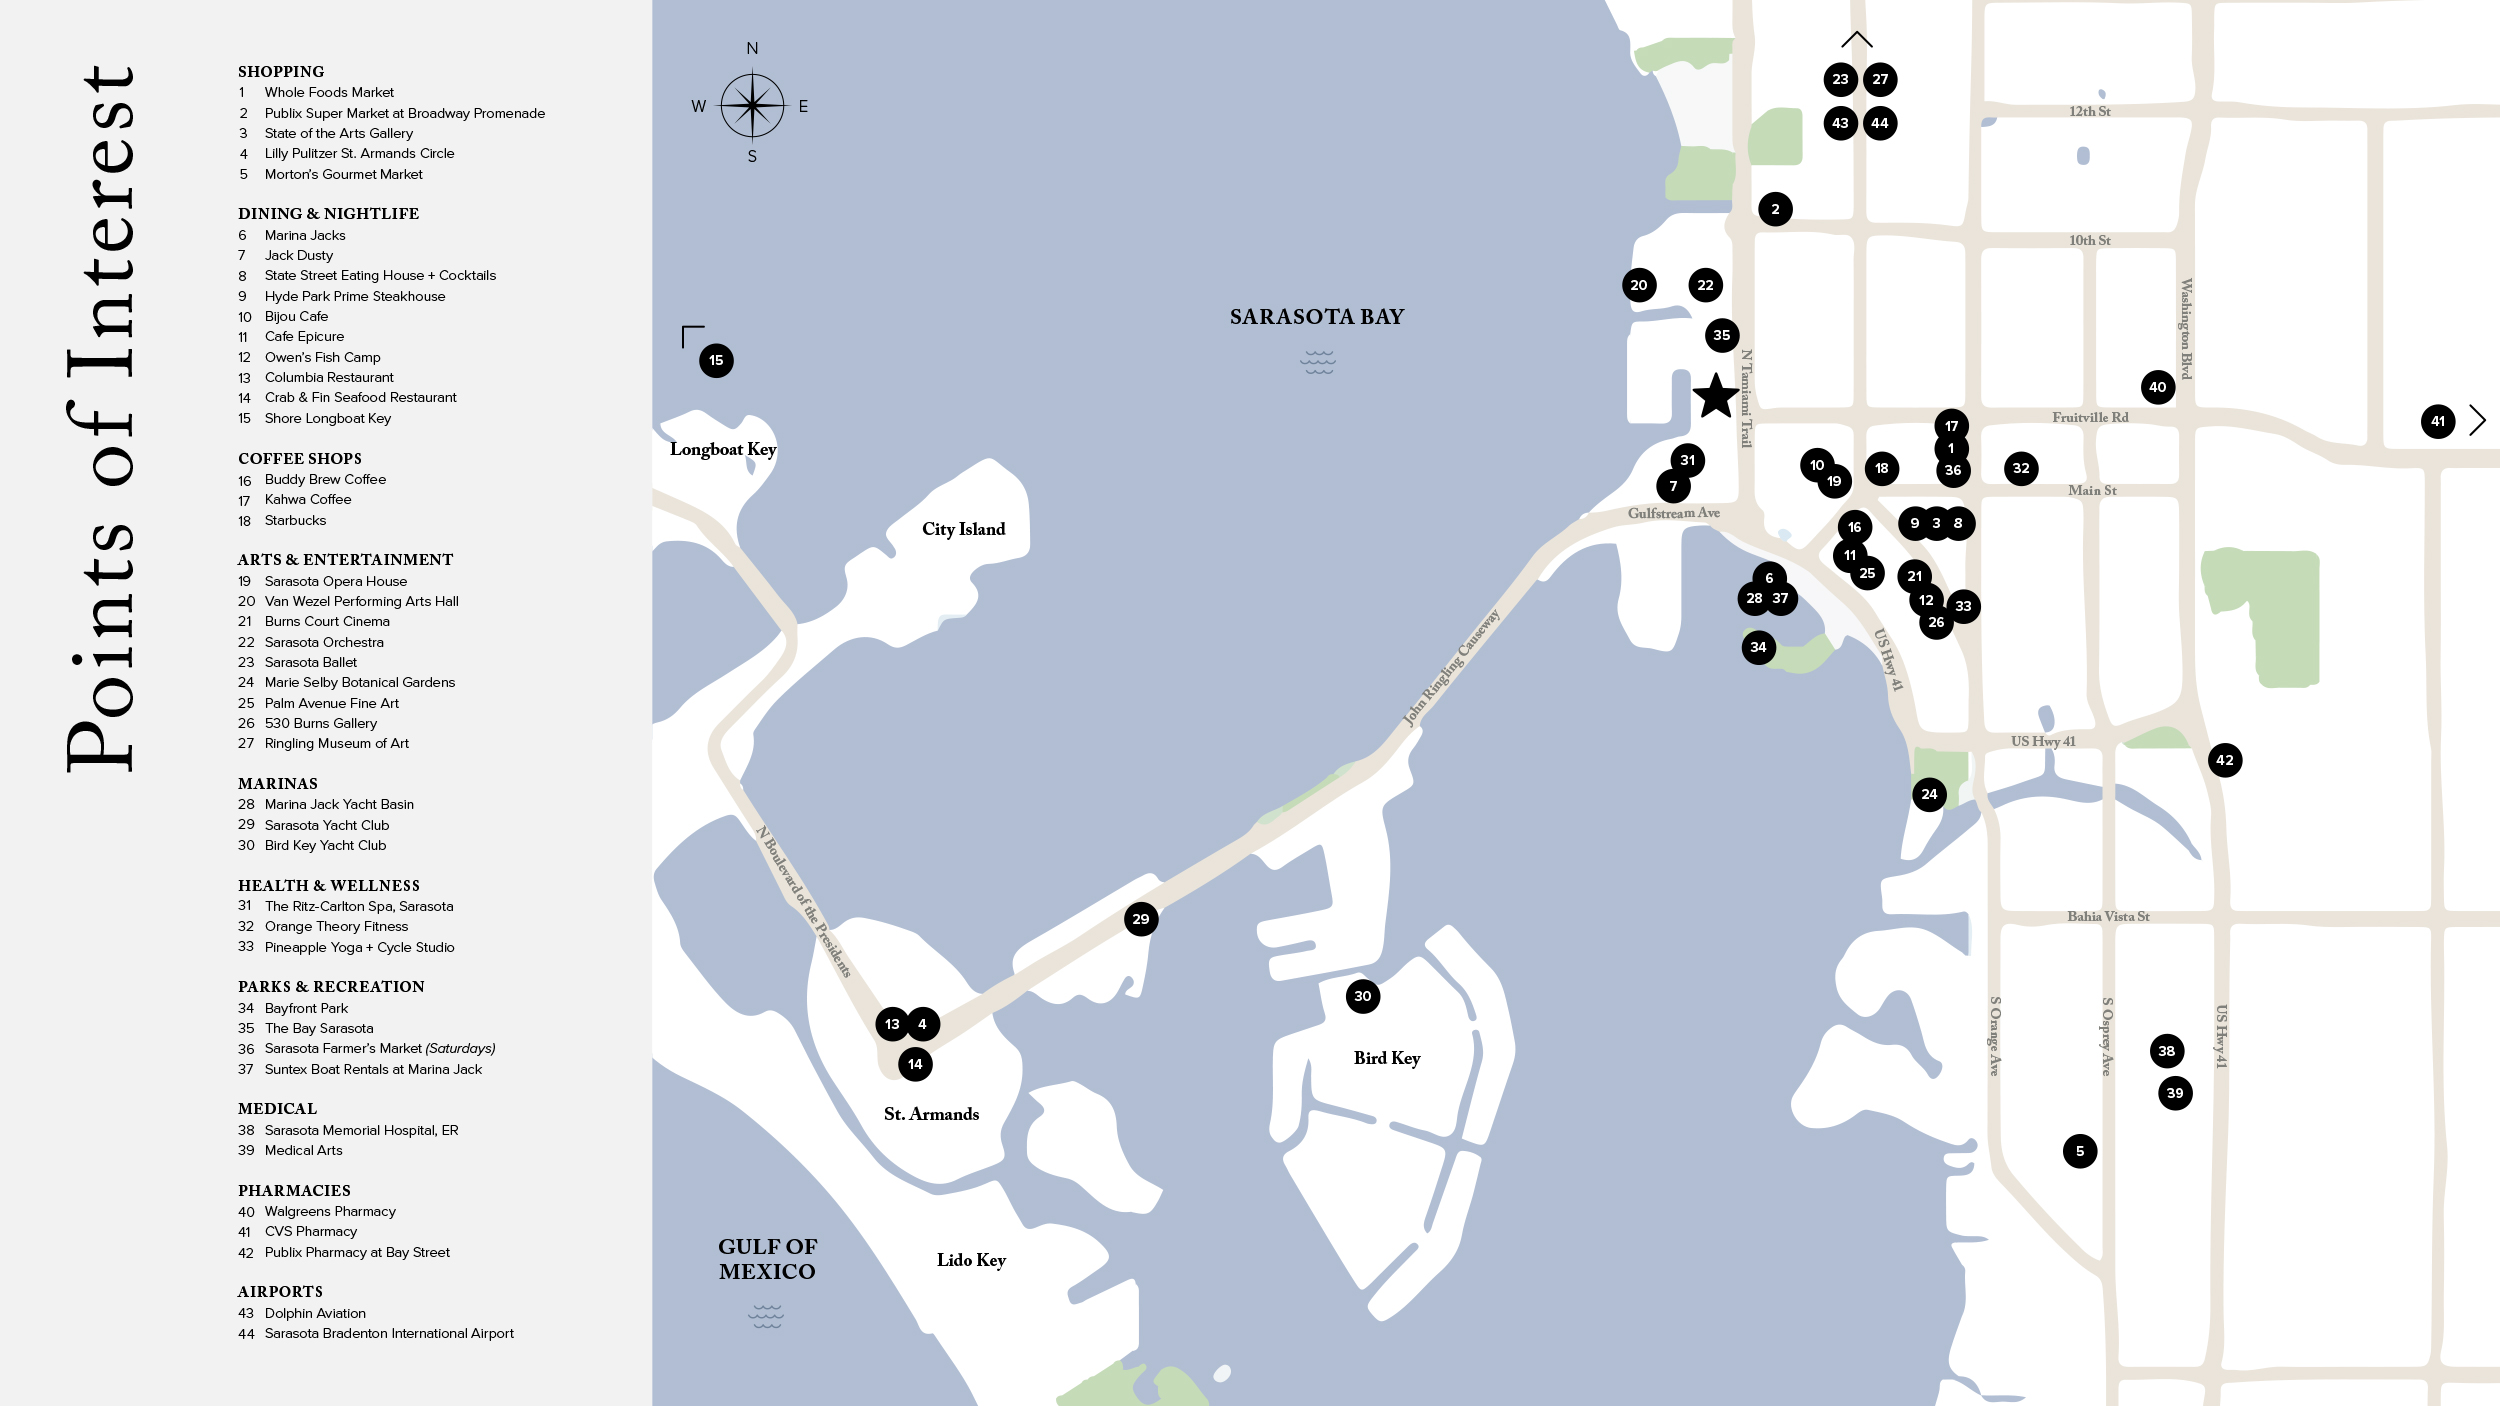 The Ritz Carlton Residences Points of Interest Map